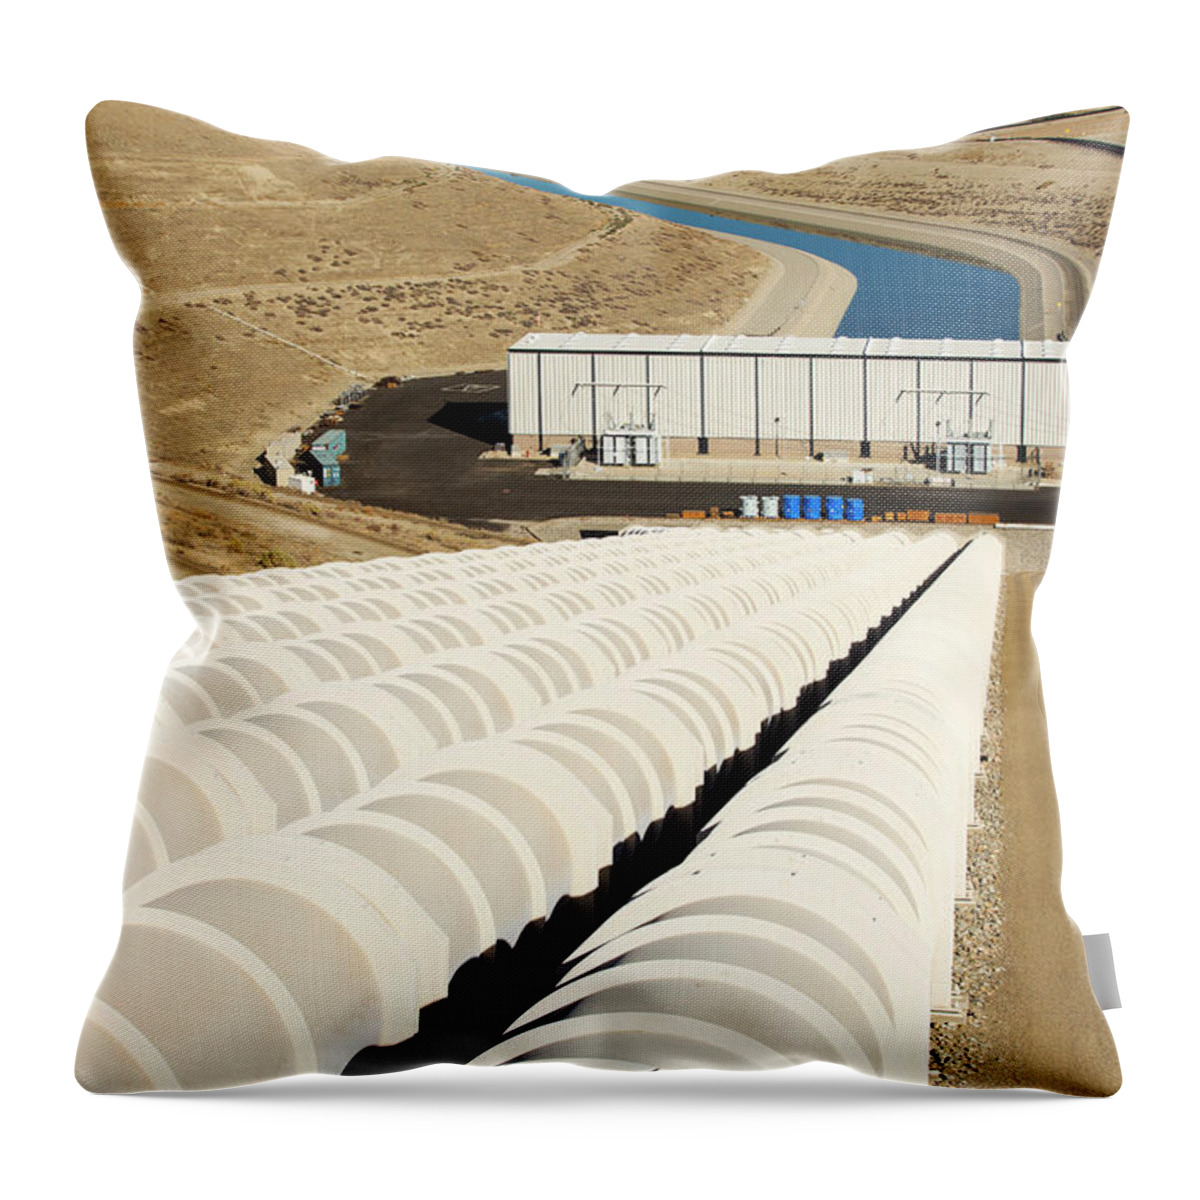 Usa Throw Pillow featuring the photograph Pumping Station Sending Water Uphill Over The Mountains On by Ashley Cooper / Naturepl.com